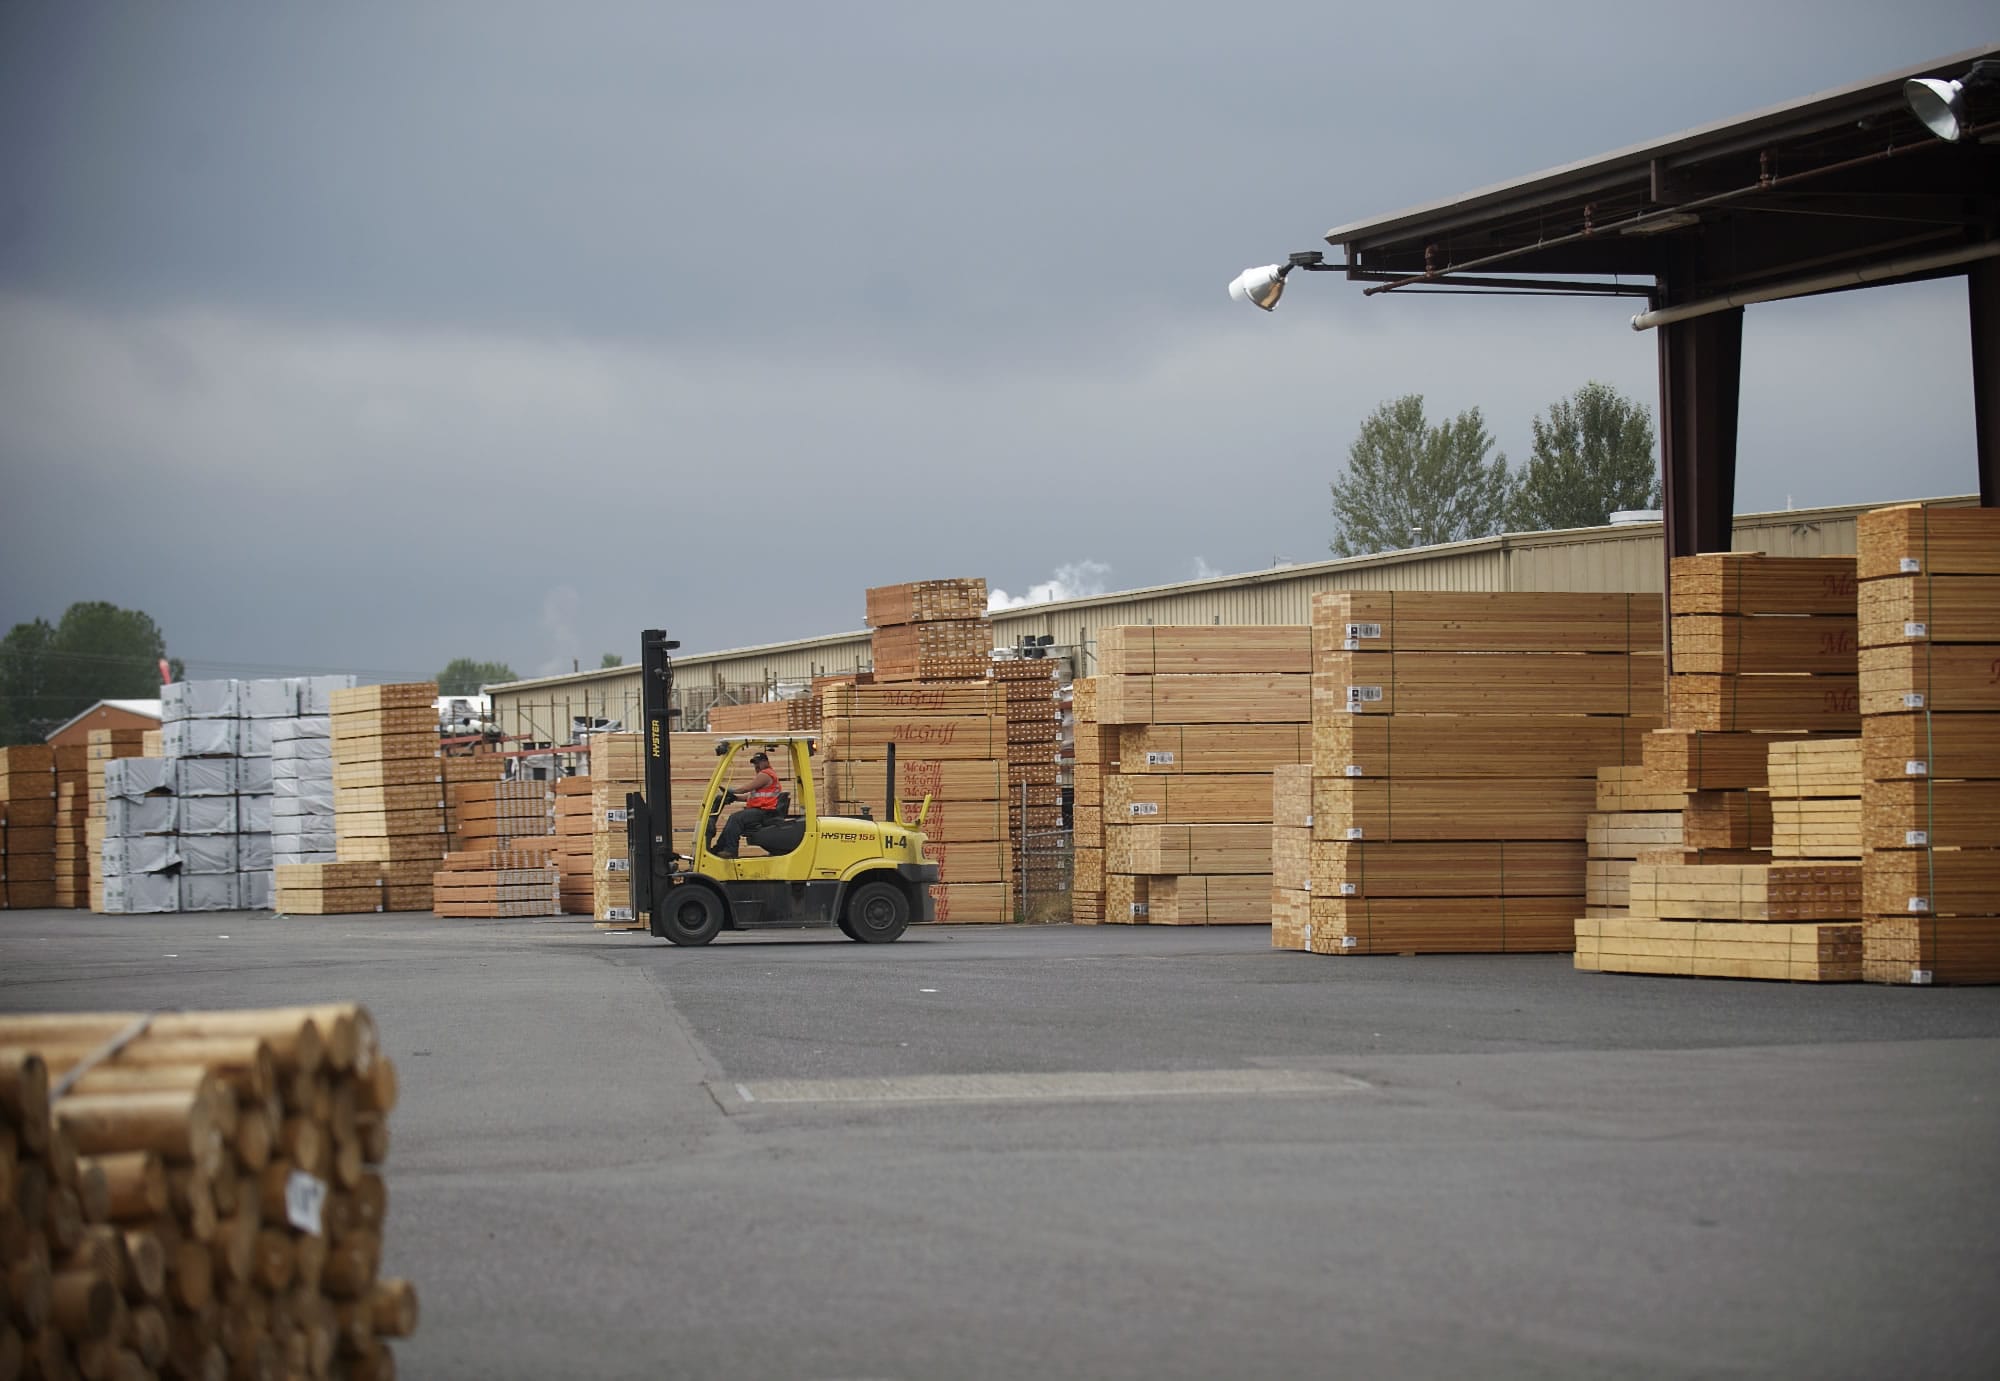 Wholesale supplier Allweather Wood employs 60 workers at its manufacturing and distribution facility in Washougal.